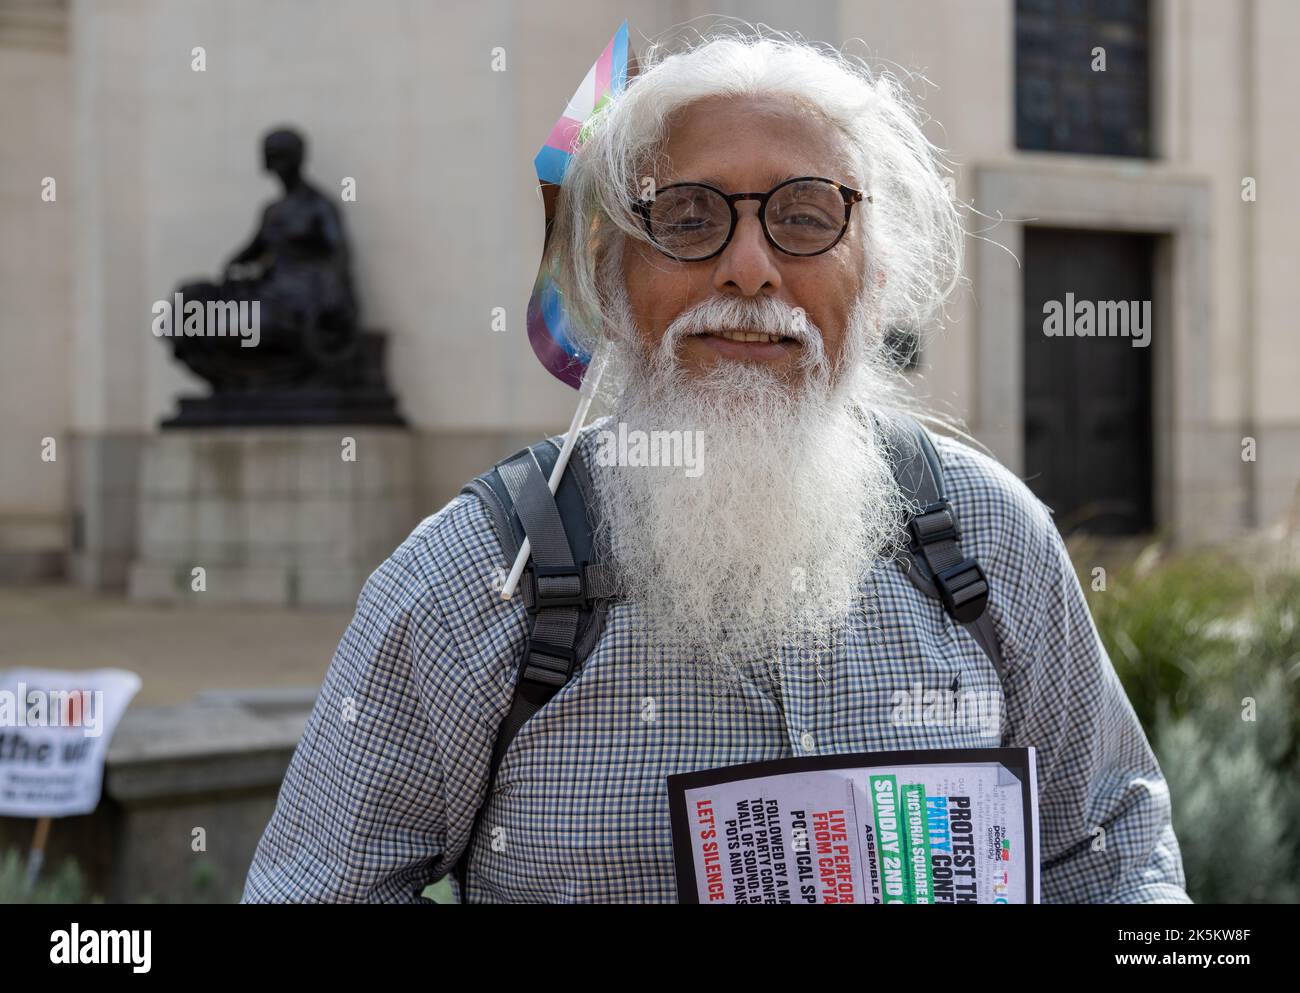 A supporter of The People's Assembly lobbies support to protest the Conservative Party conference in Birmingham. A man with long white hair and beard. Stock Photo